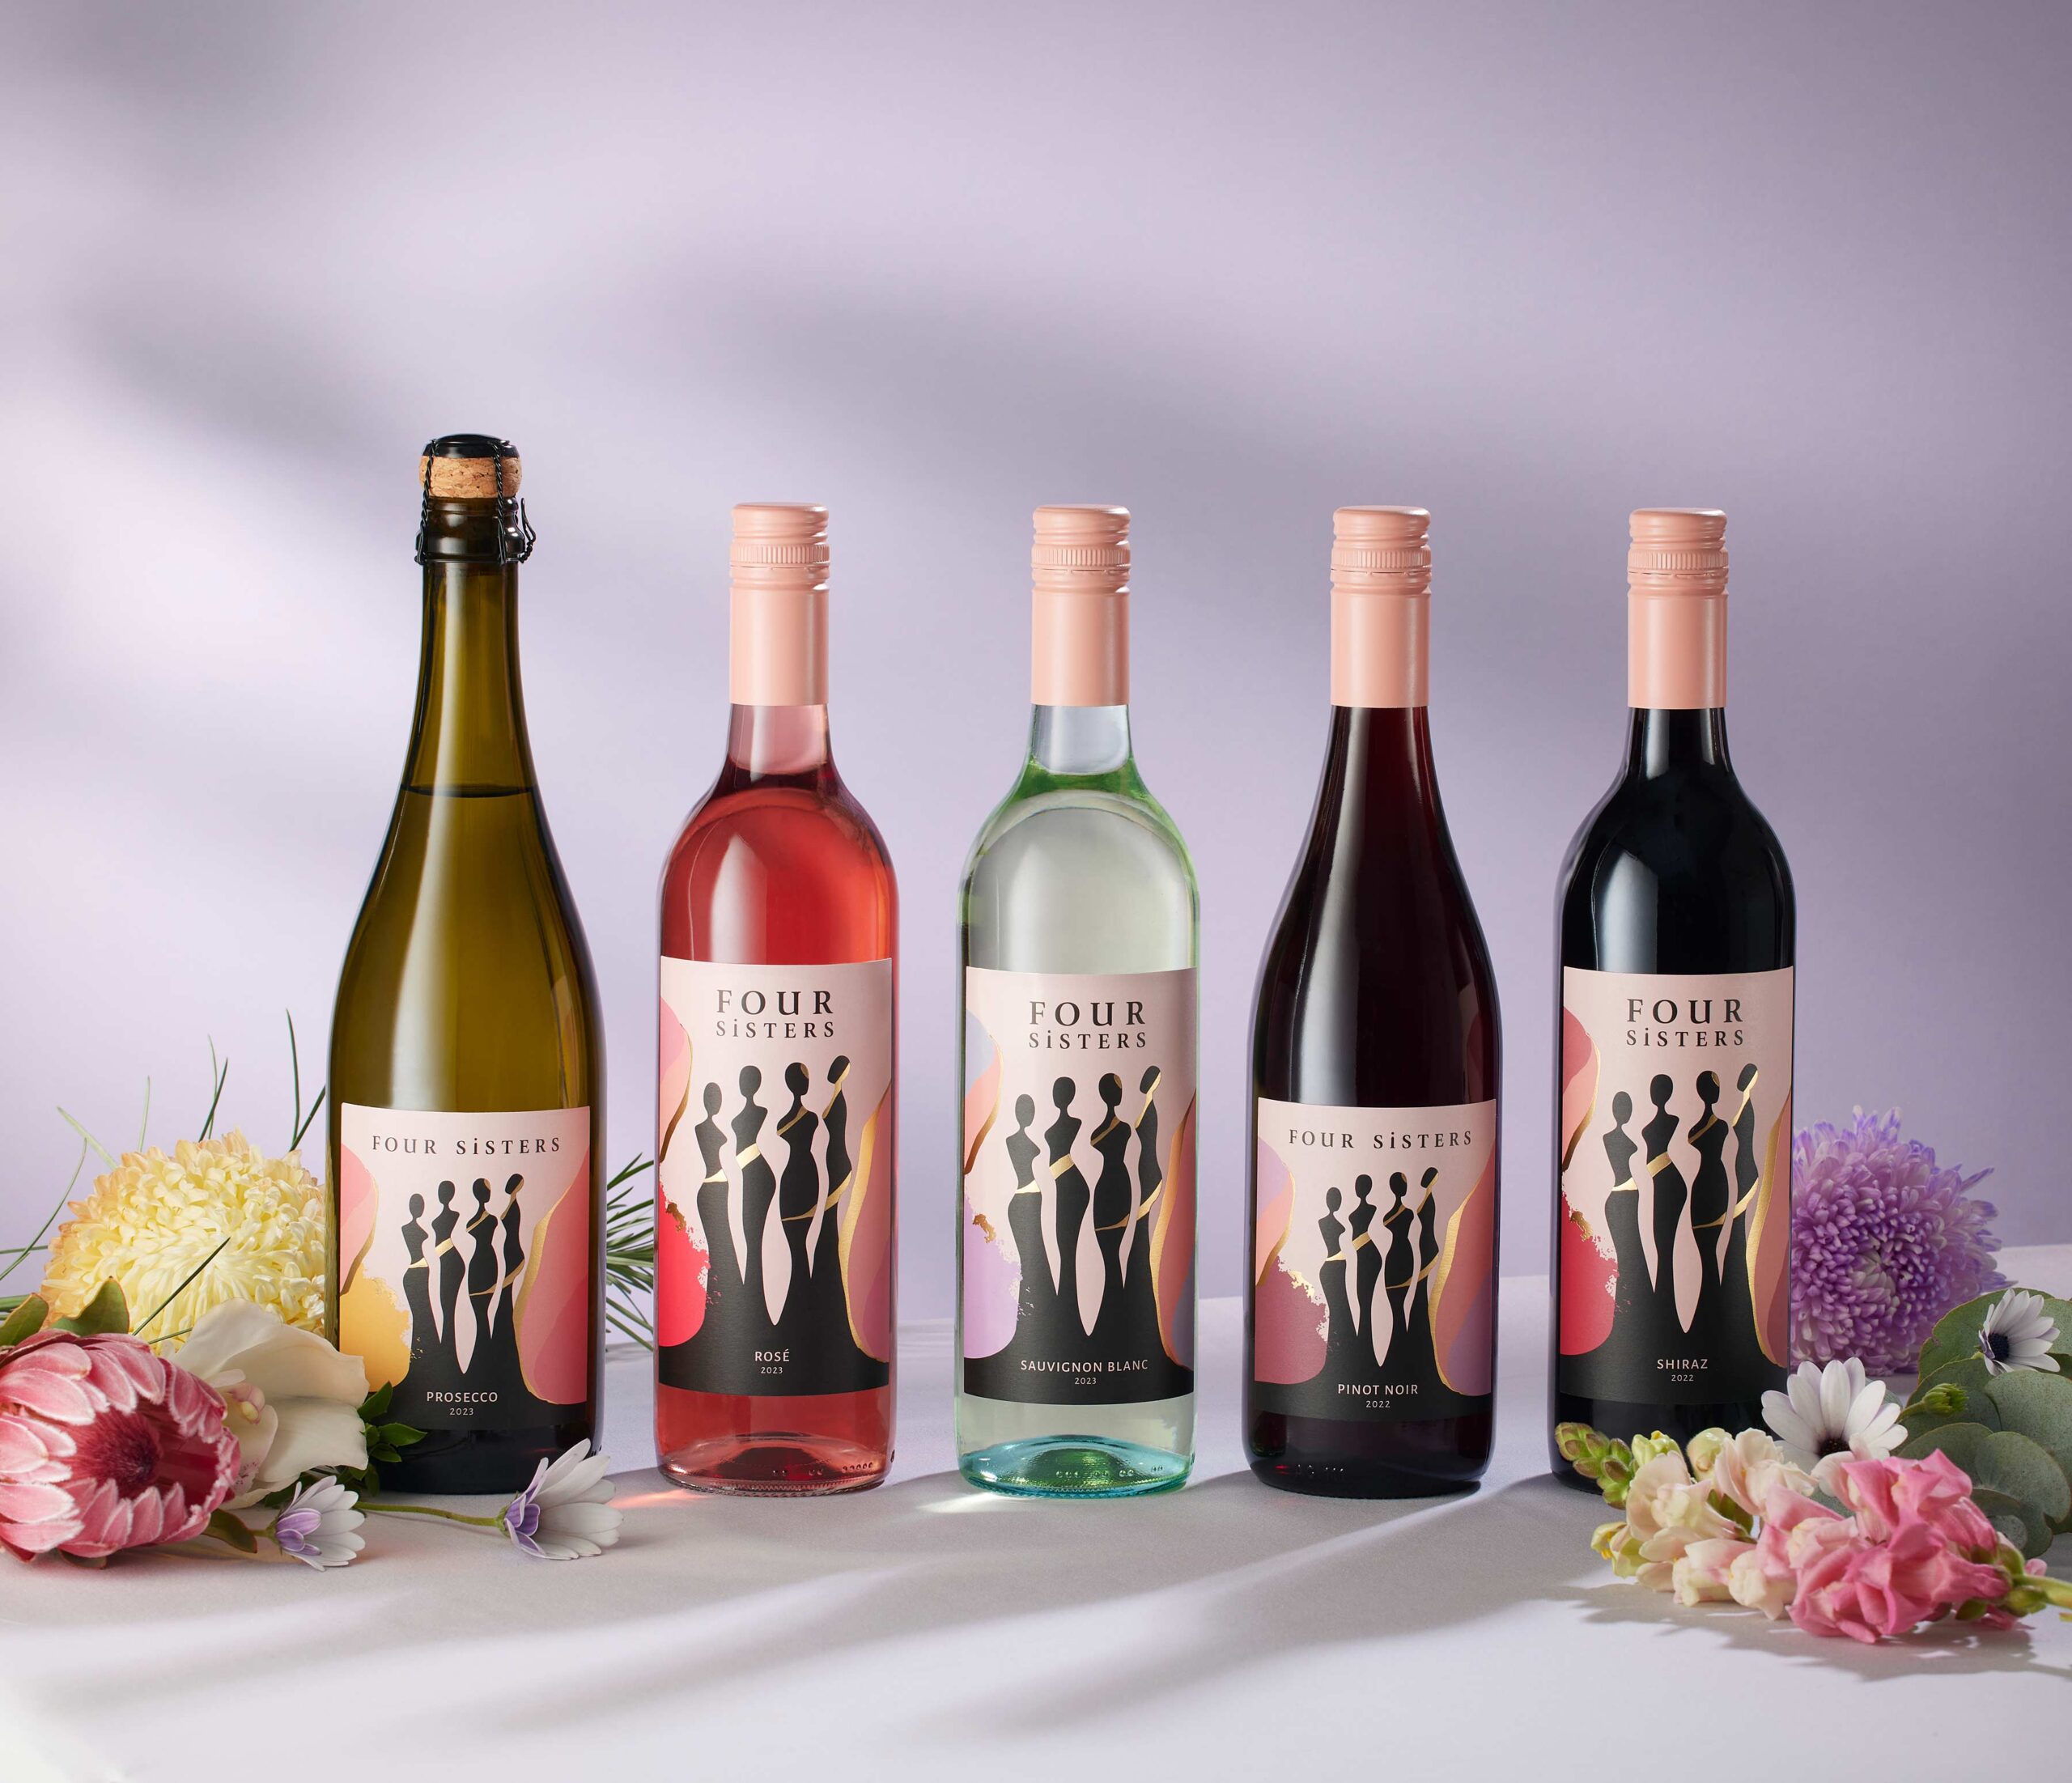 4 Sisters Wine product photography in studio with props